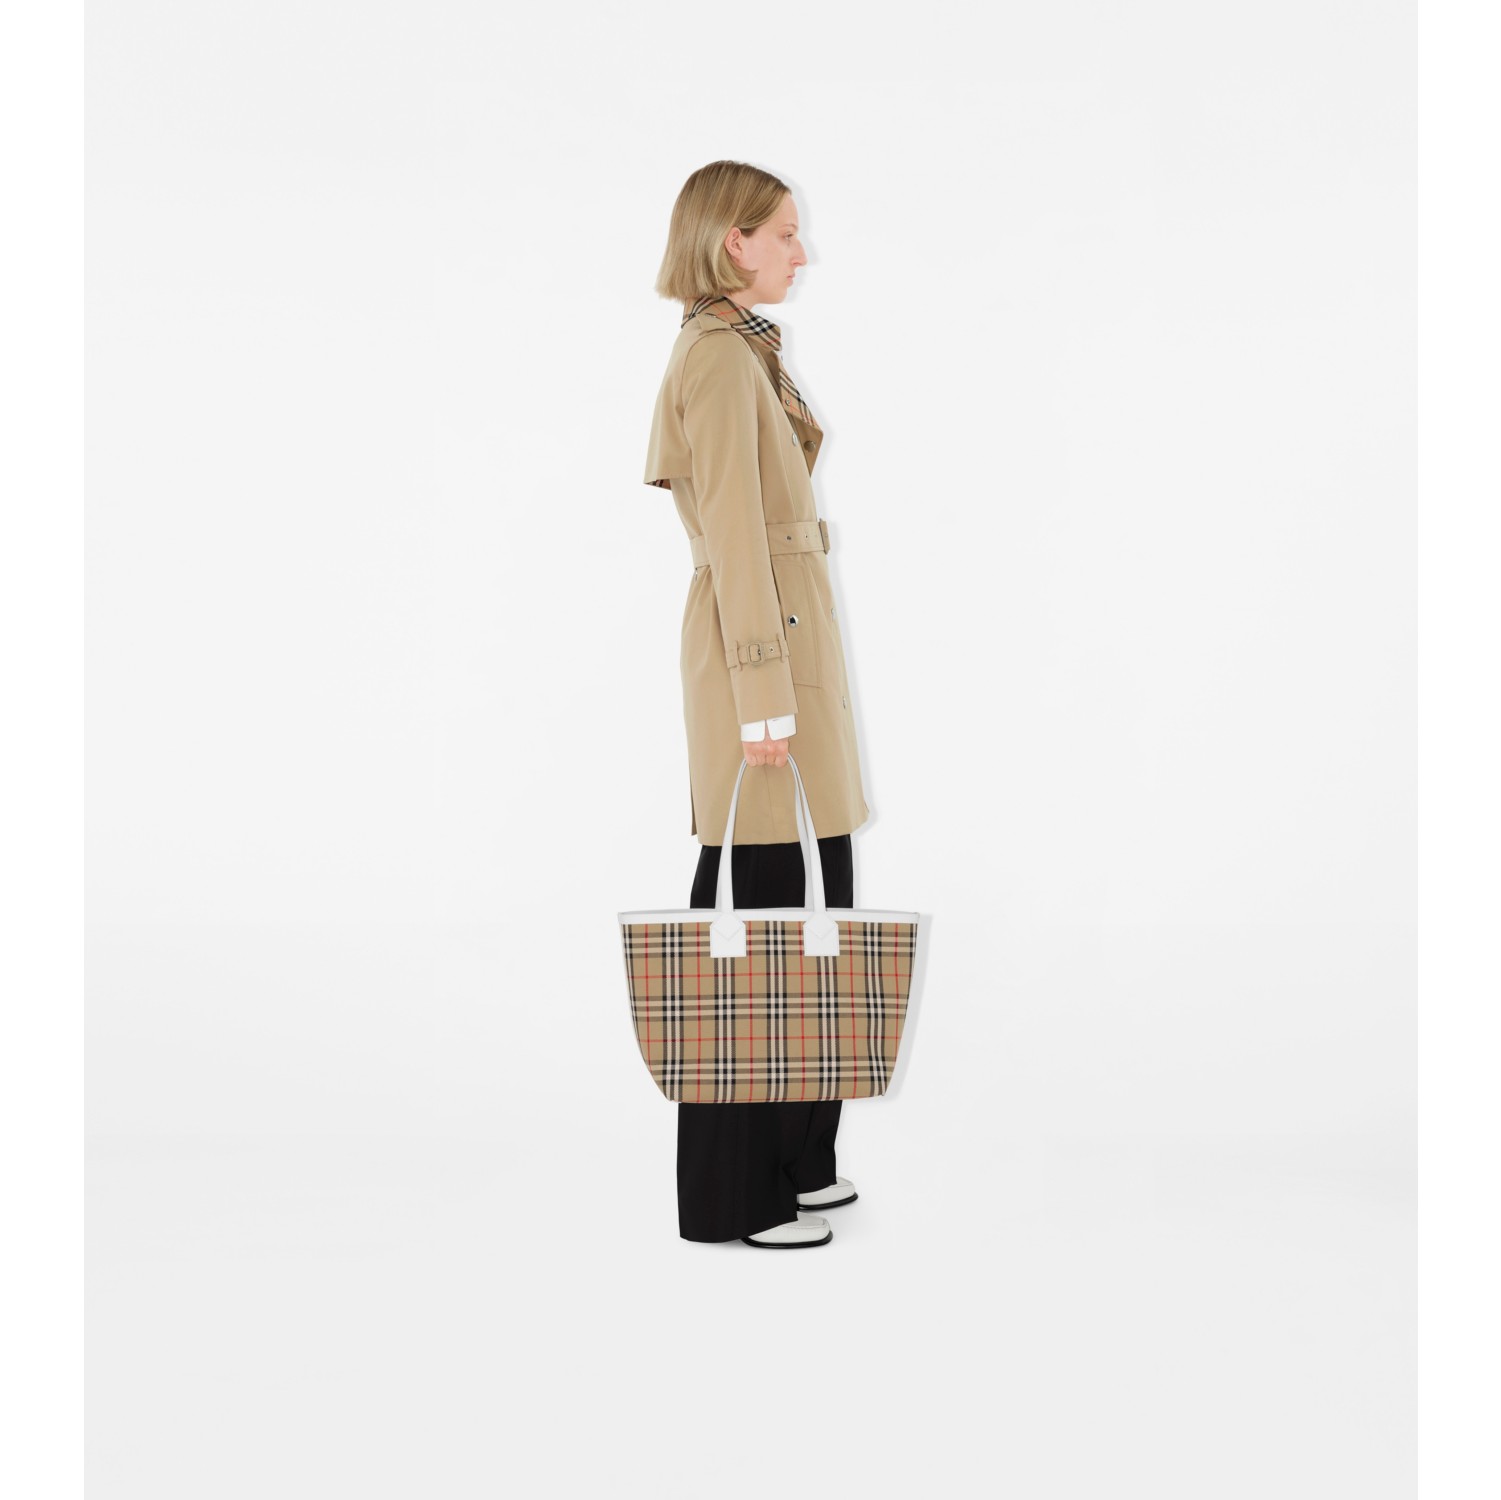 Medium London Tote in Archive beige/white - Women, Vintage Check | Burberry® Official